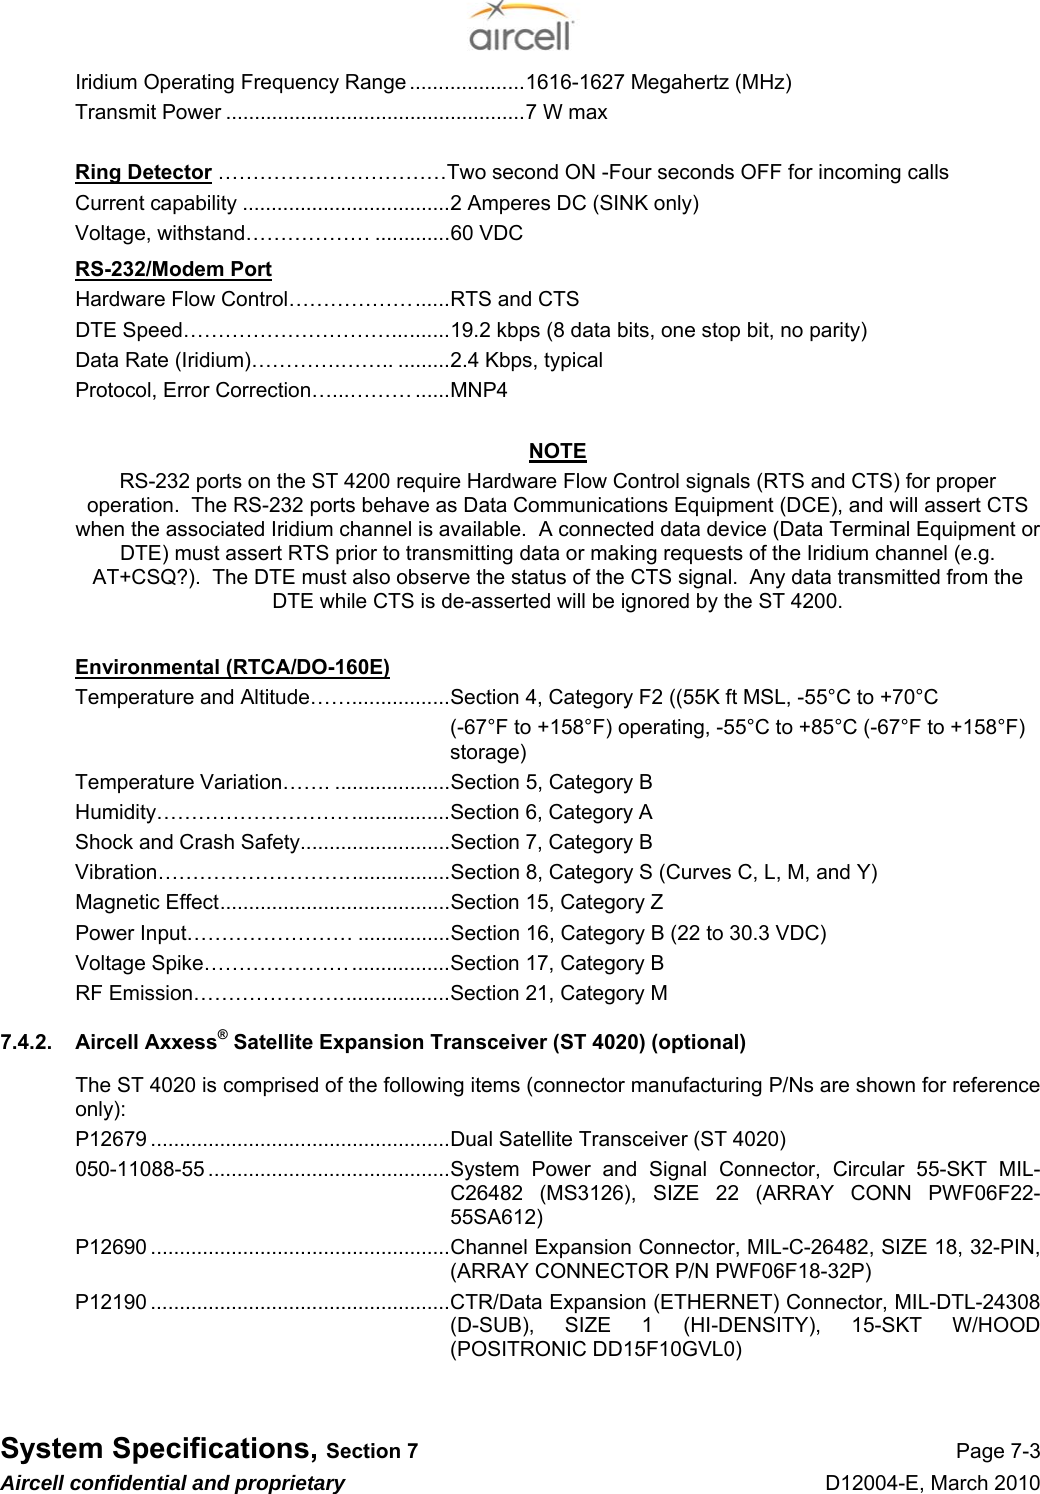  System Specifications, Section 7 Page 7-3 Aircell confidential and proprietary D12004-E, March 2010 Iridium Operating Frequency Range ....................1616-1627 Megahertz (MHz) Transmit Power ....................................................7 W max   Ring Detector ……………………………Two second ON -Four seconds OFF for incoming calls Current capability ....................................2 Amperes DC (SINK only) Voltage, withstand……………… .............60 VDC  RS-232/Modem Port Hardware Flow Control………………......RTS and CTS DTE Speed…………………………..........19.2 kbps (8 data bits, one stop bit, no parity) Data Rate (Iridium)………….…….. .........2.4 Kbps, typical Protocol, Error Correction…...……… ......MNP4  NOTE RS-232 ports on the ST 4200 require Hardware Flow Control signals (RTS and CTS) for proper operation.  The RS-232 ports behave as Data Communications Equipment (DCE), and will assert CTS when the associated Iridium channel is available.  A connected data device (Data Terminal Equipment or DTE) must assert RTS prior to transmitting data or making requests of the Iridium channel (e.g. AT+CSQ?).  The DTE must also observe the status of the CTS signal.  Any data transmitted from the DTE while CTS is de-asserted will be ignored by the ST 4200.  Environmental (RTCA/DO-160E) Temperature and Altitude…….................Section 4, Category F2 ((55K ft MSL, -55°C to +70°C (-67°F to +158°F) operating, -55°C to +85°C (-67°F to +158°F) storage) Temperature Variation……. ....................Section 5, Category B Humidity………………………..................Section 6, Category A Shock and Crash Safety..........................Section 7, Category B Vibration………………………..................Section 8, Category S (Curves C, L, M, and Y) Magnetic Effect........................................Section 15, Category Z Power Input…………………… ................Section 16, Category B (22 to 30.3 VDC) Voltage Spike………………….................Section 17, Category B RF Emission…………………...................Section 21, Category M 7.4.2.  Aircell Axxess® Satellite Expansion Transceiver (ST 4020) (optional) The ST 4020 is comprised of the following items (connector manufacturing P/Ns are shown for reference only): P12679 ....................................................Dual Satellite Transceiver (ST 4020) 050-11088-55 ..........................................System  Power and Signal Connector, Circular 55-SKT MIL-C26482 (MS3126), SIZE 22 (ARRAY CONN PWF06F22-55SA612) P12690 ....................................................Channel Expansion Connector, MIL-C-26482, SIZE 18, 32-PIN, (ARRAY CONNECTOR P/N PWF06F18-32P) P12190 ....................................................CTR/Data Expansion (ETHERNET) Connector, MIL-DTL-24308 (D-SUB), SIZE 1 (HI-DENSITY), 15-SKT W/HOOD (POSITRONIC DD15F10GVL0) 